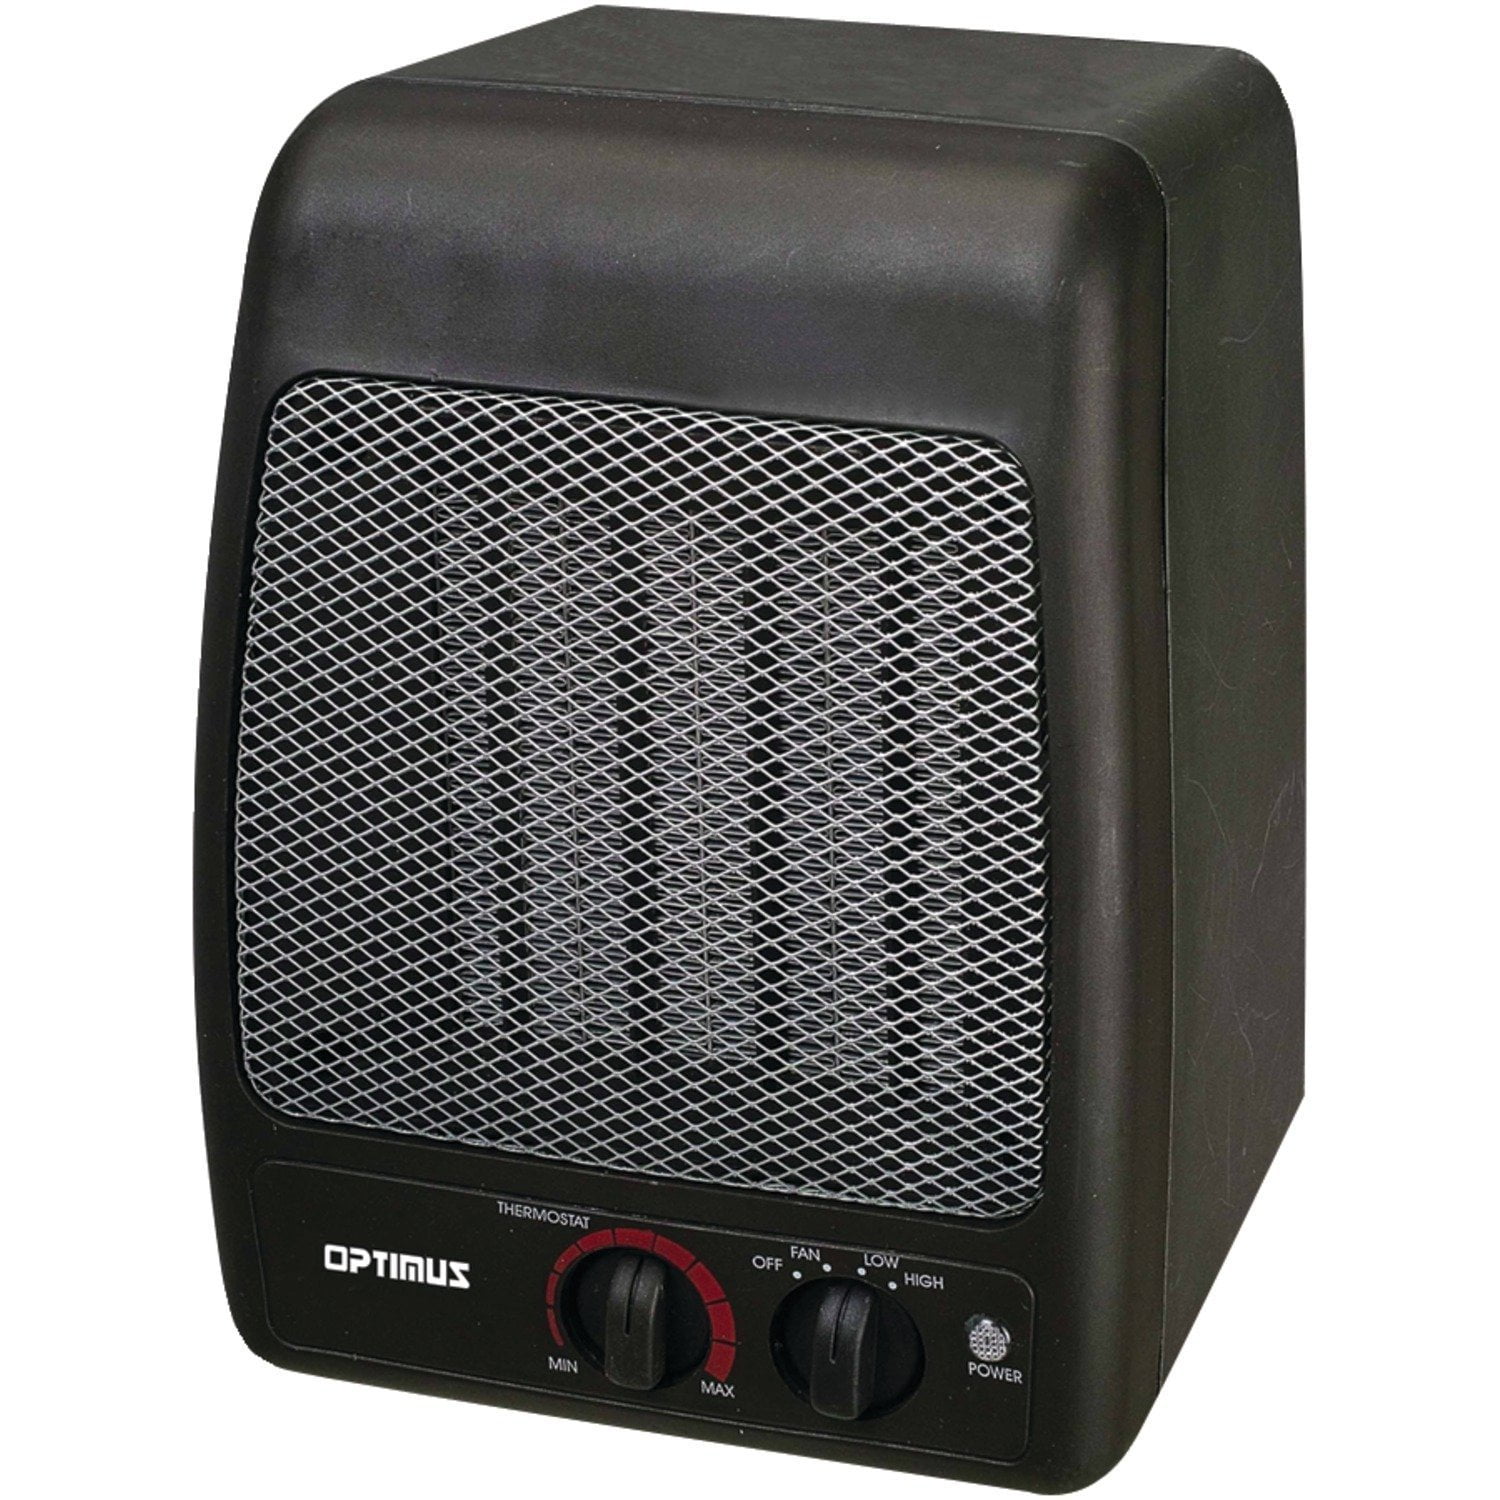 Small Portable Heater, Optimus H-7000 Black Electric Room Portable